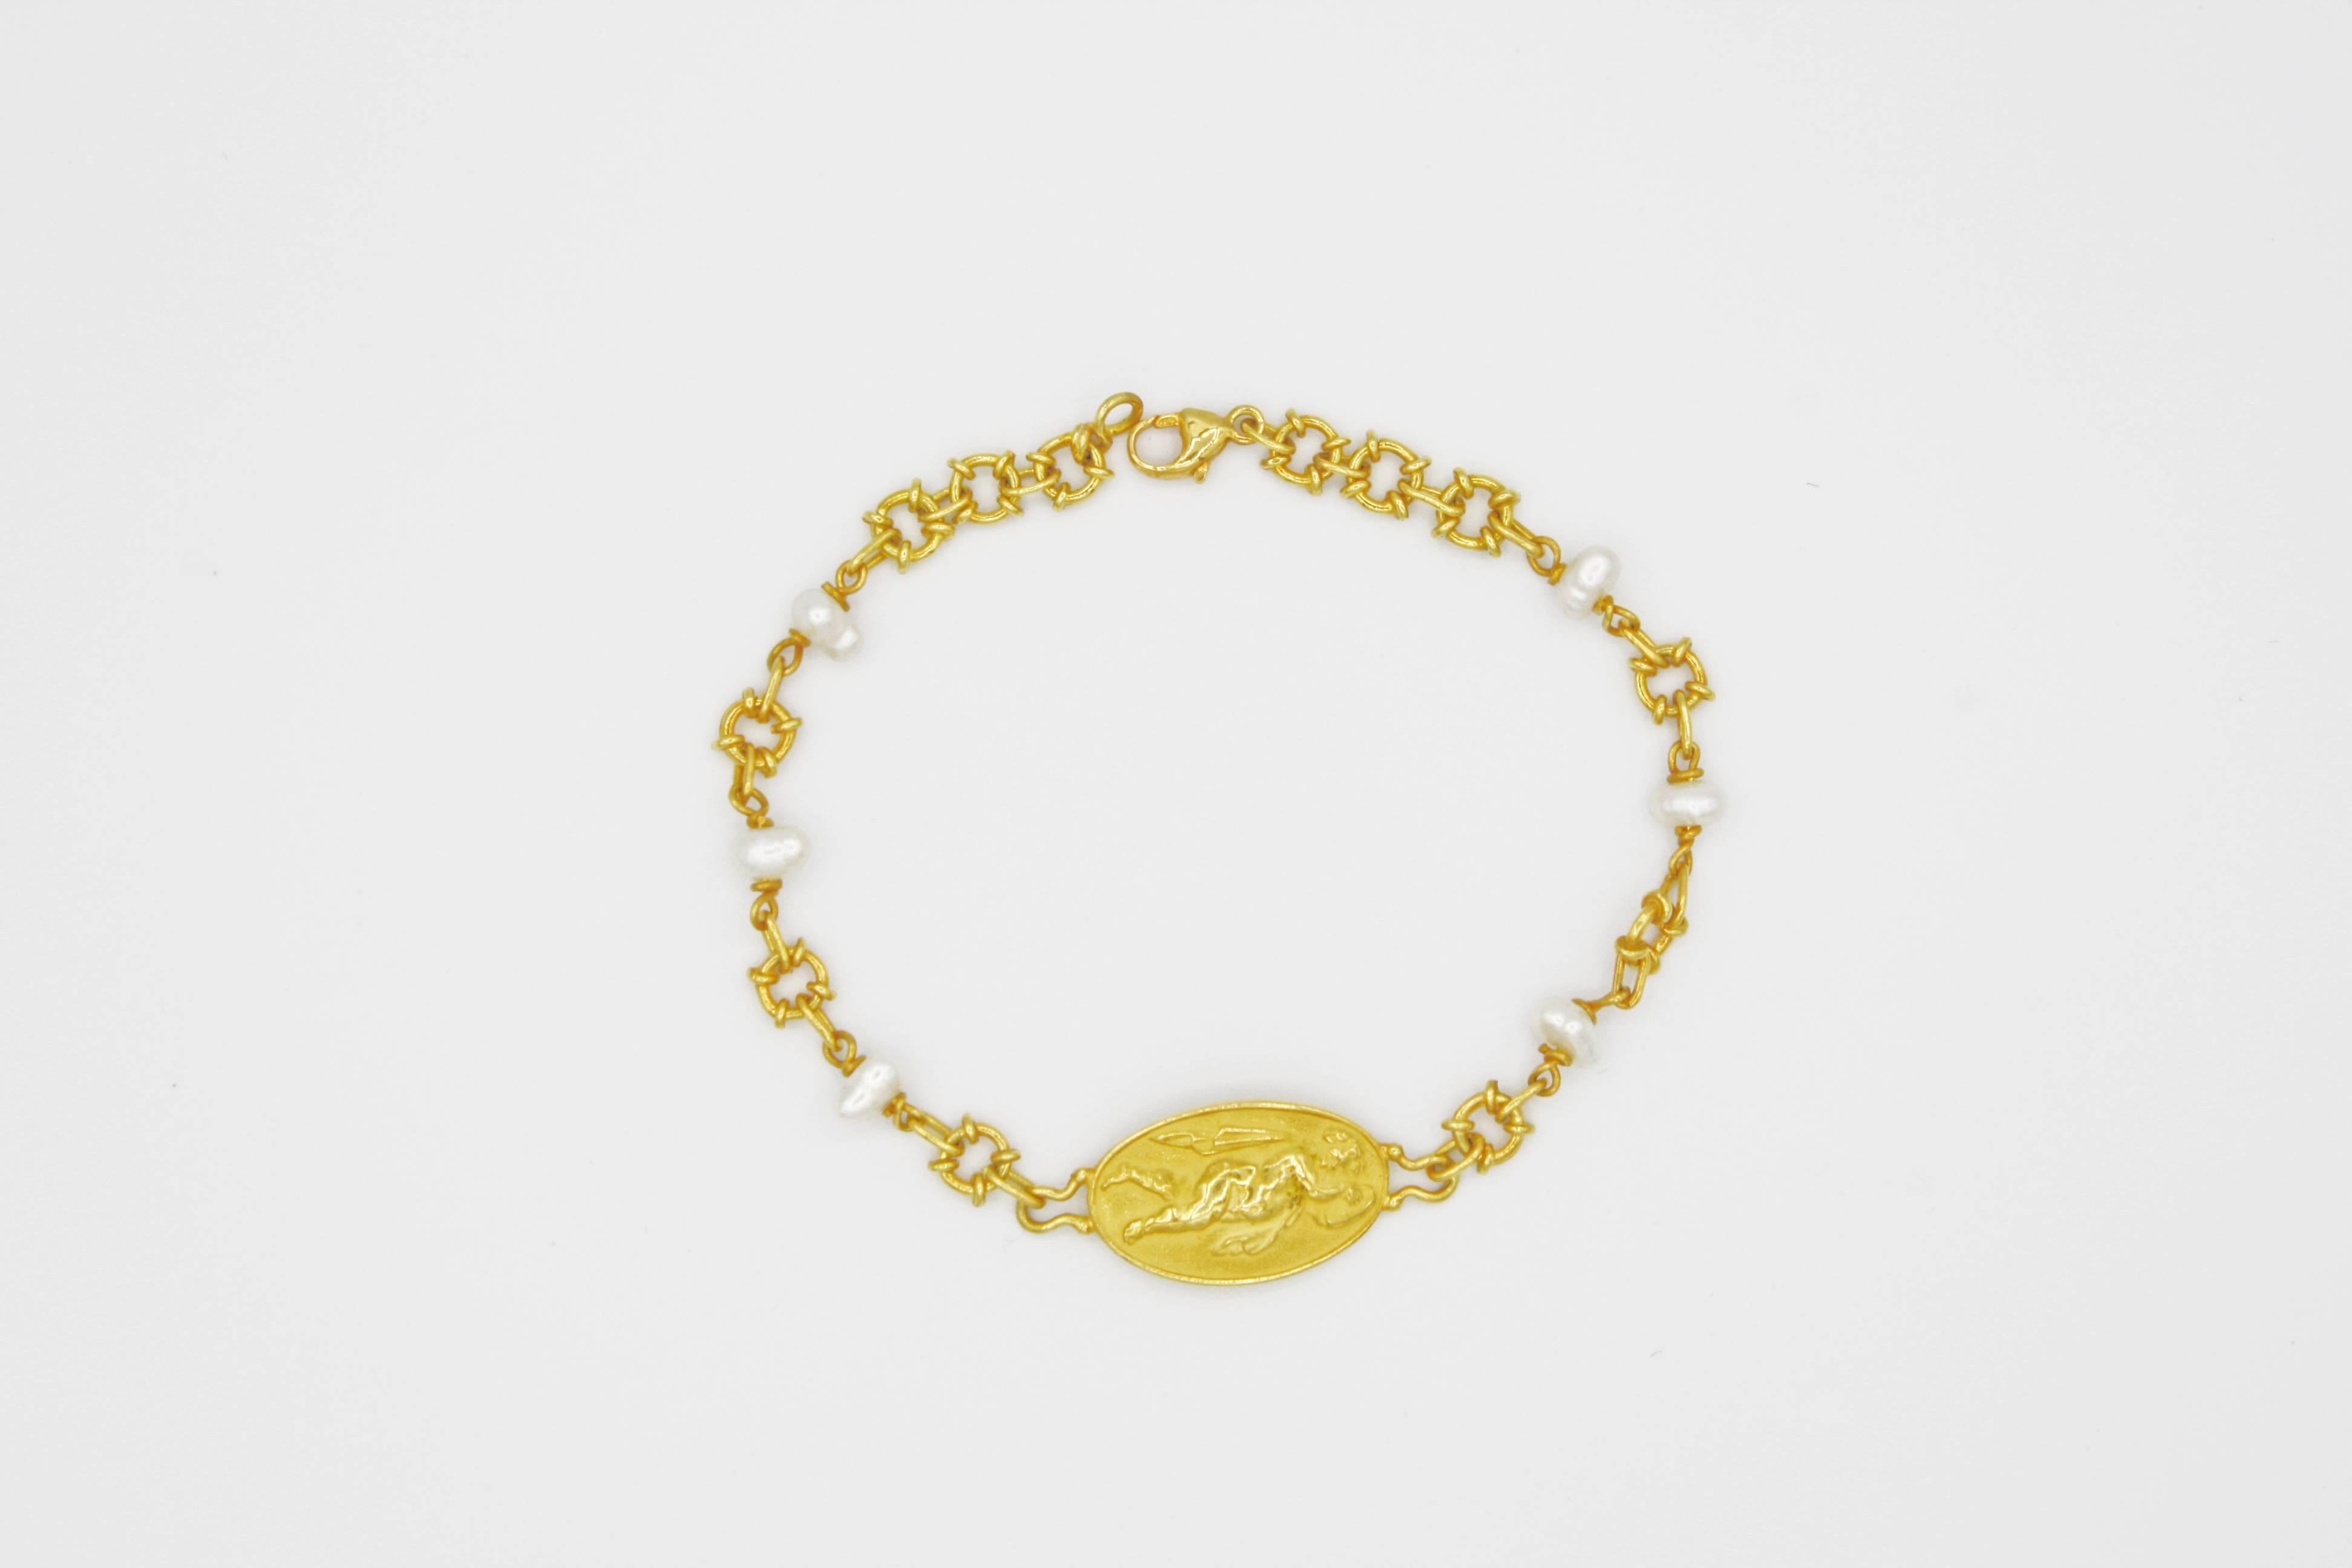 This ethereal 18k gold link bracelet is a piece from Renato Cipullo's Romantica Collection.  The bracelet is comprised of a cupid medallion joined with elaborate loops as well as petite freshwater pearls.